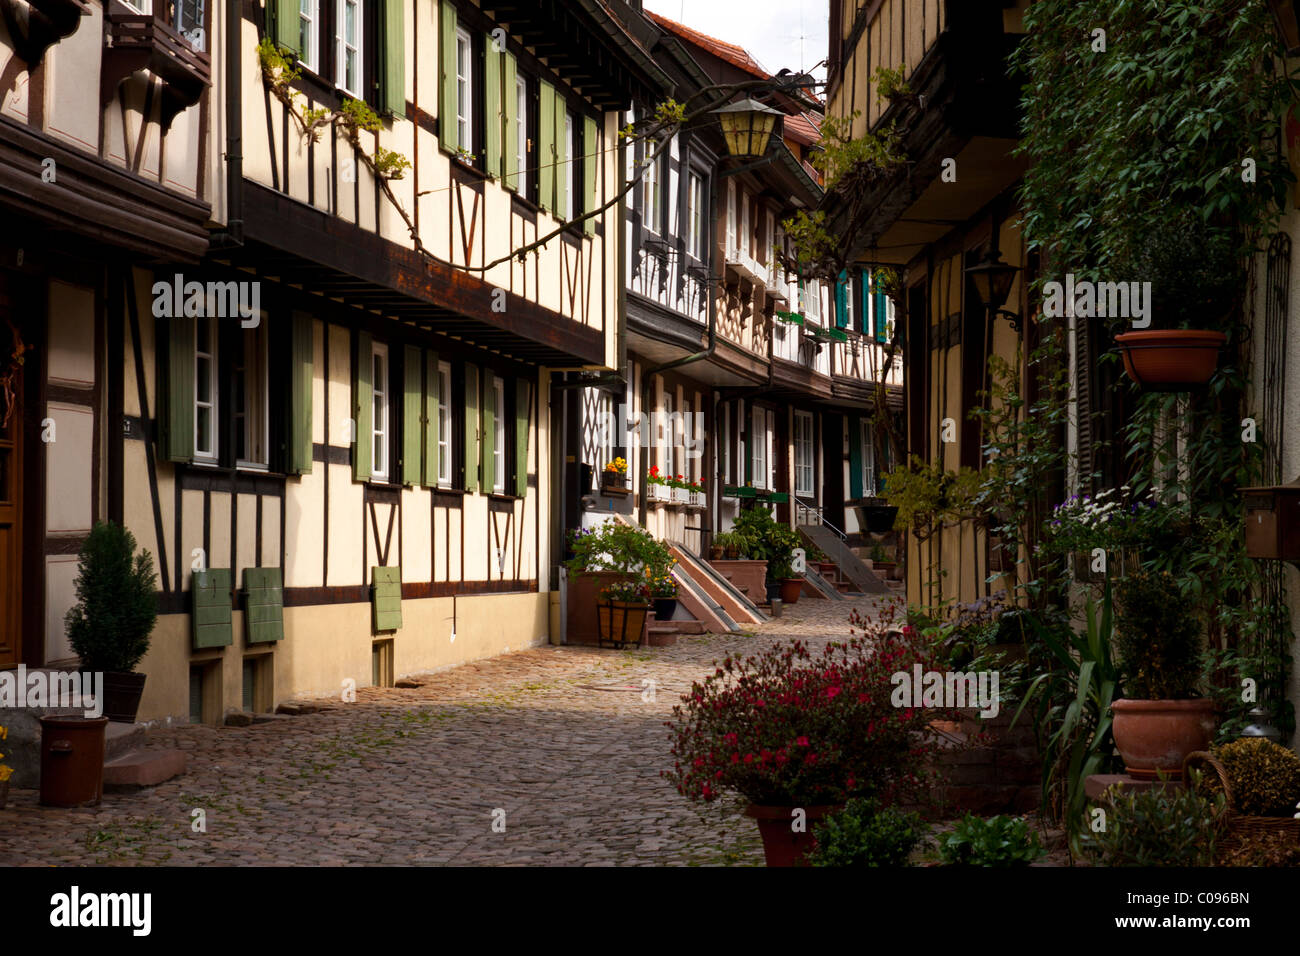 The famous Engelgasse lane with its characteristic half-timbered facades, Gengenbach, Baden-Wuerttemberg, Germany, Europe Stock Photo